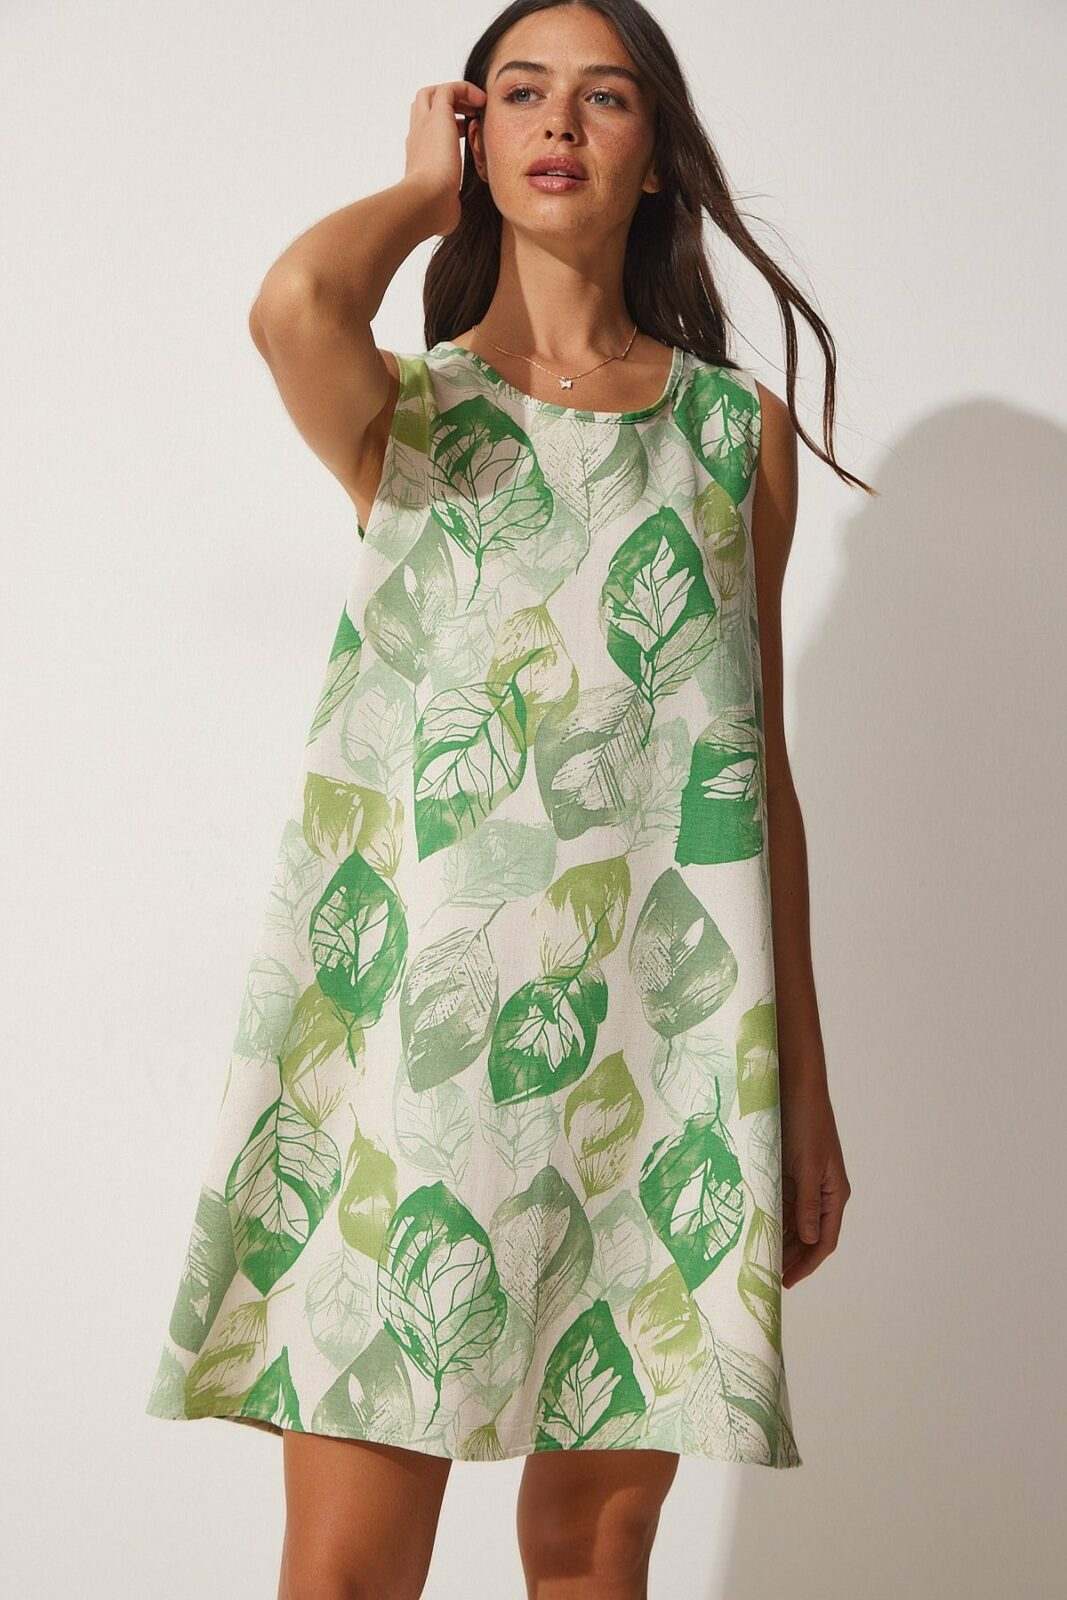 Happiness İstanbul Dress - Green